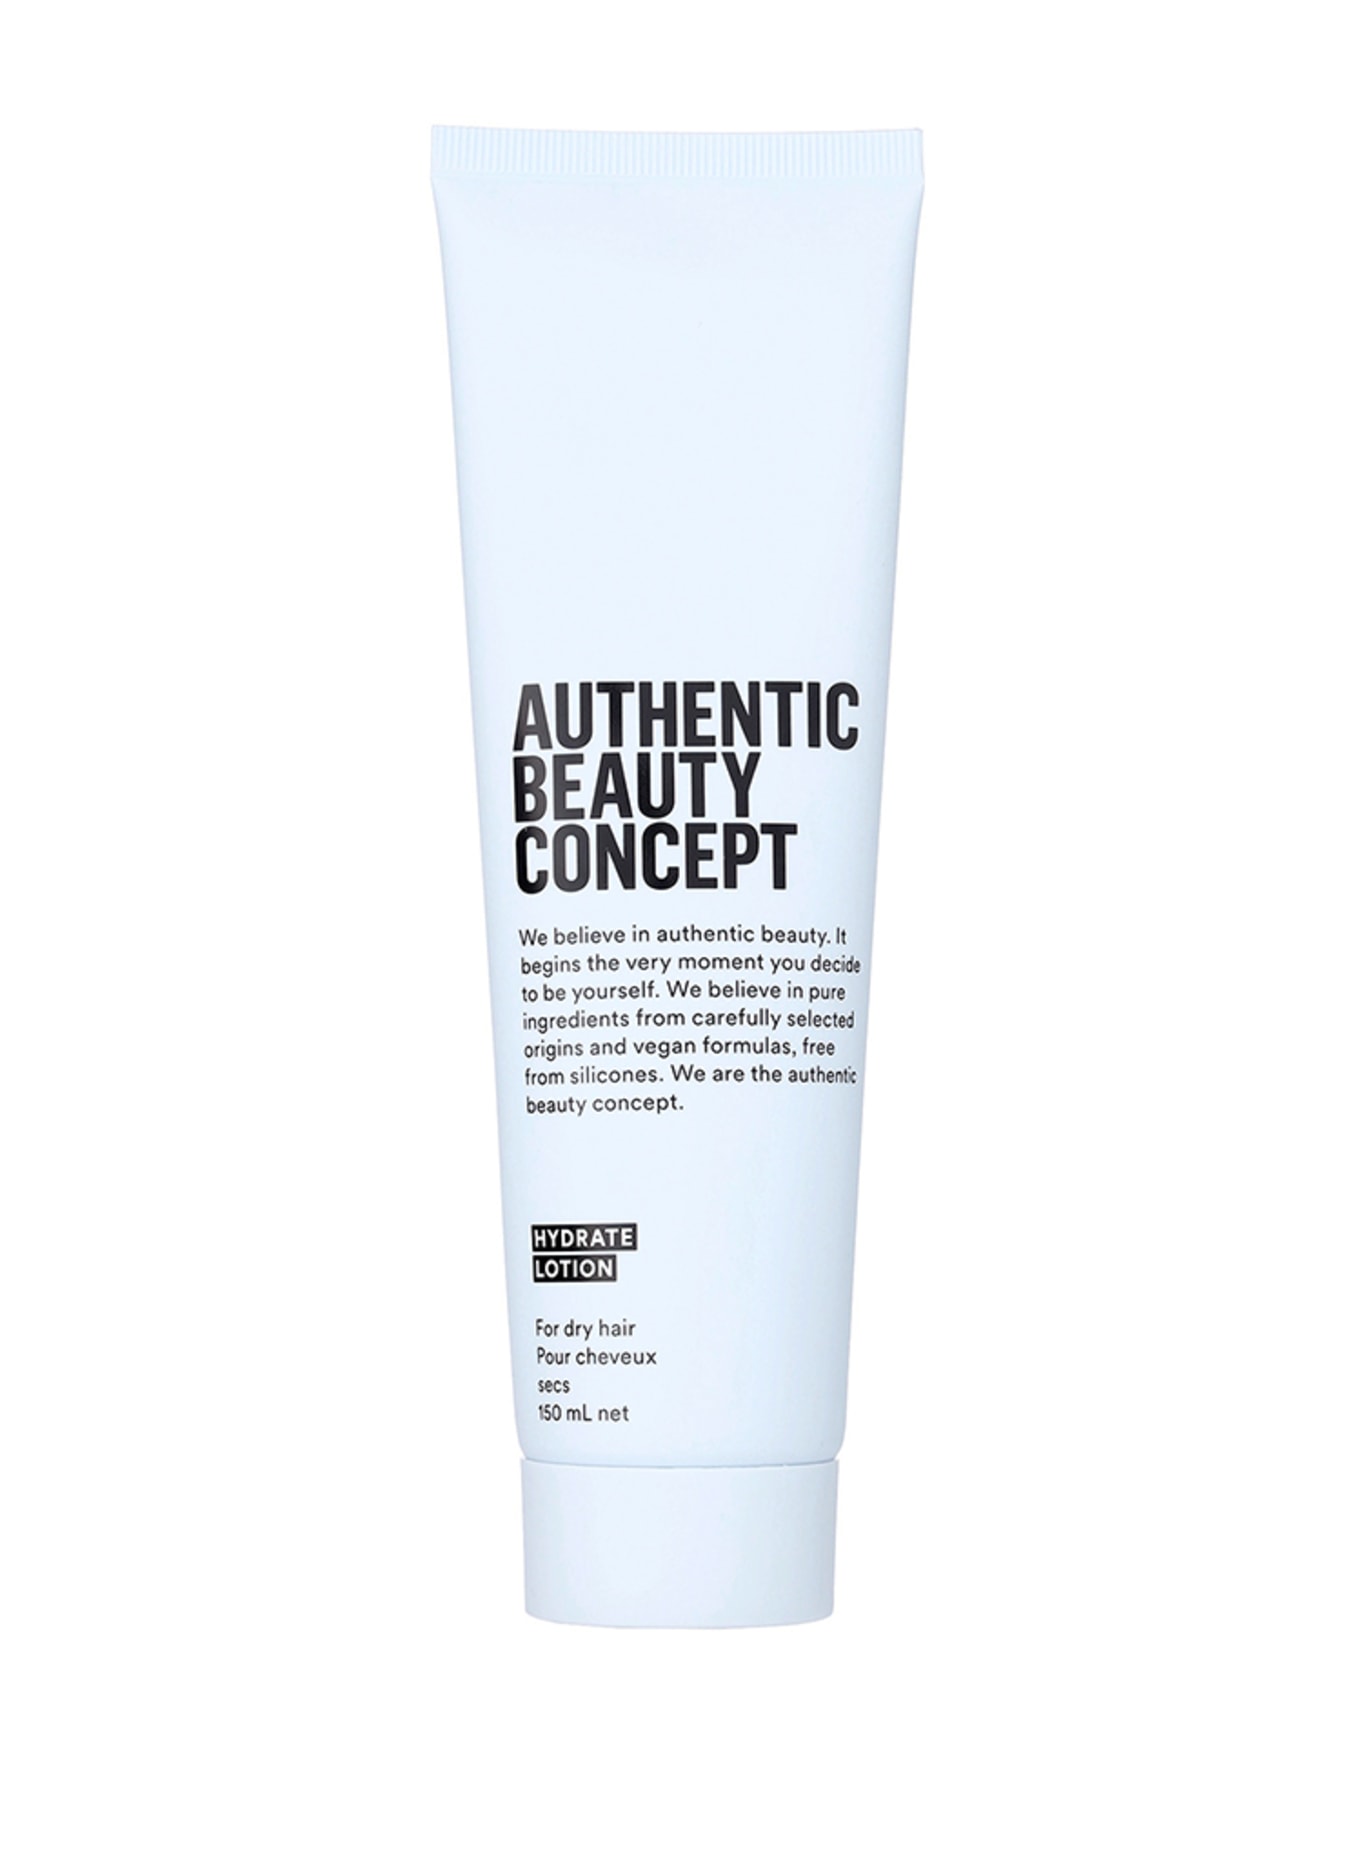 AUTHENTIC BEAUTY CONCEPT HYDRATE LOTION (Bild 1)